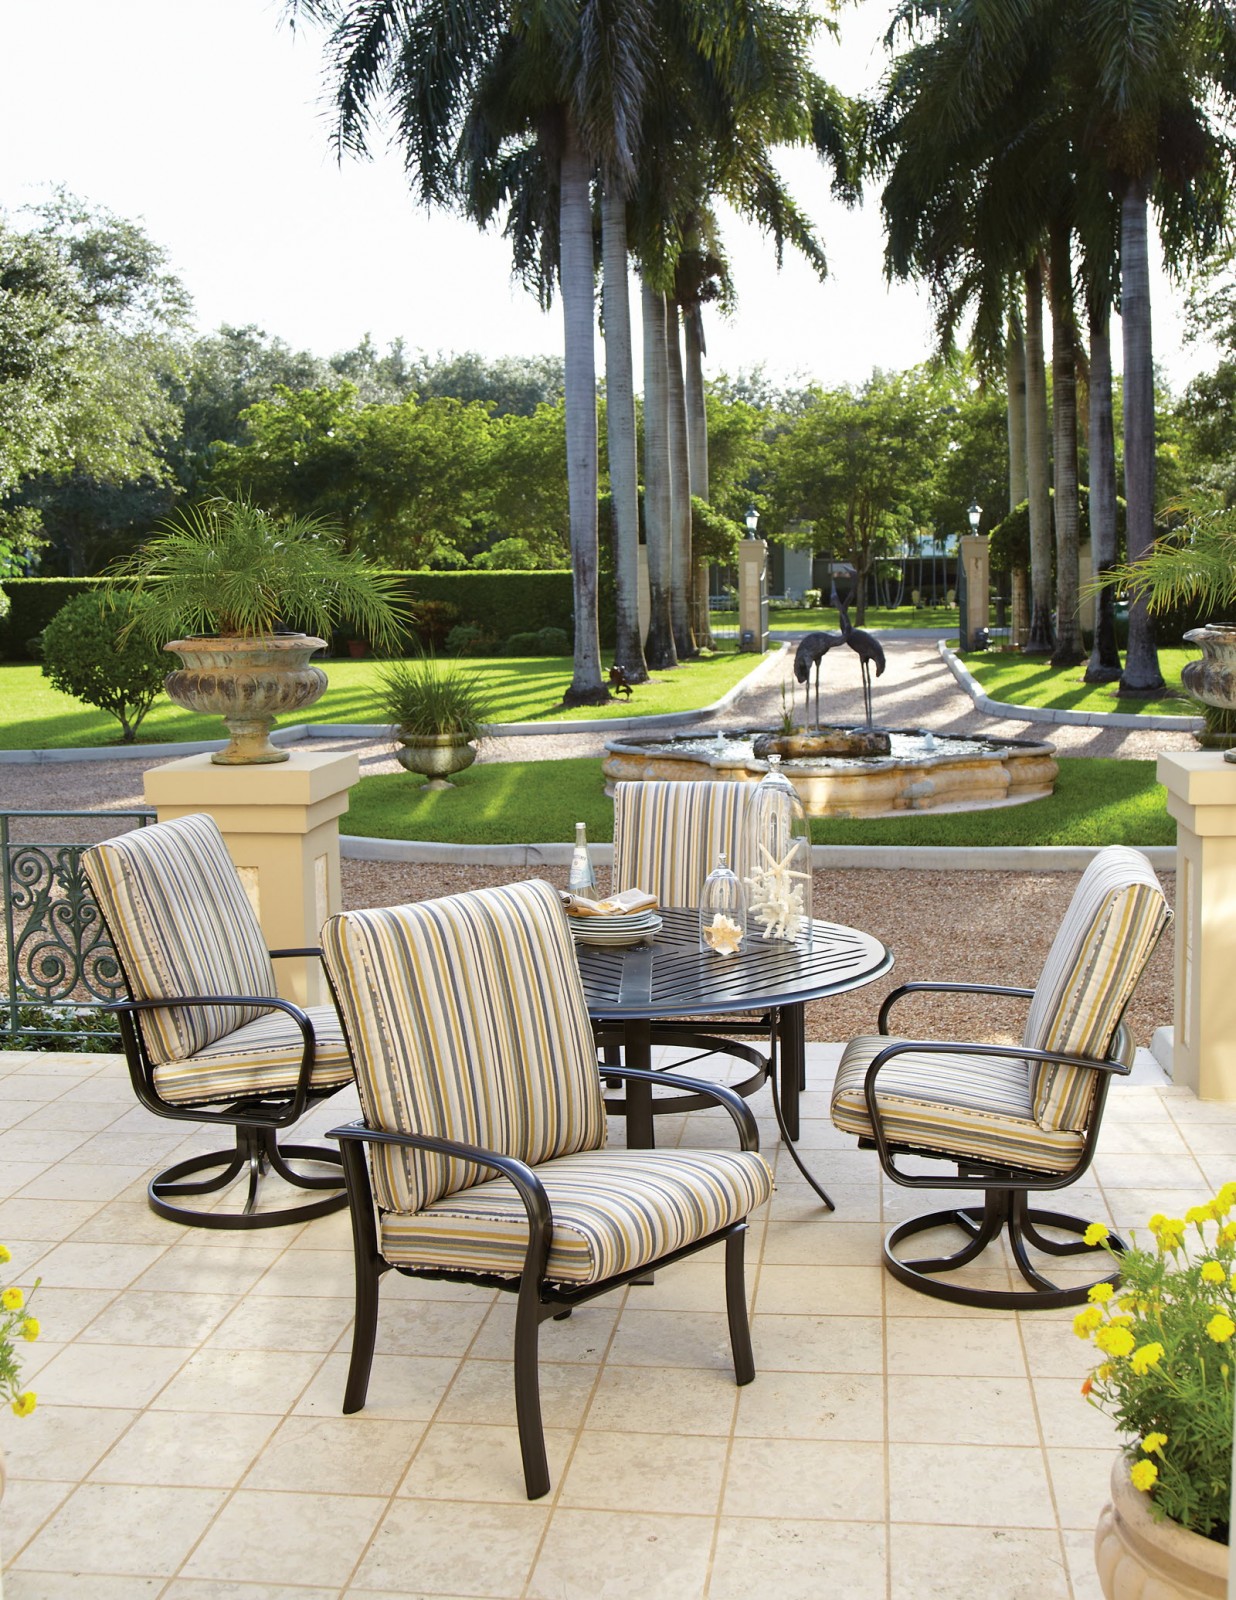 Winston Outdoor Furniture Sale Continues through March 31st - Bay